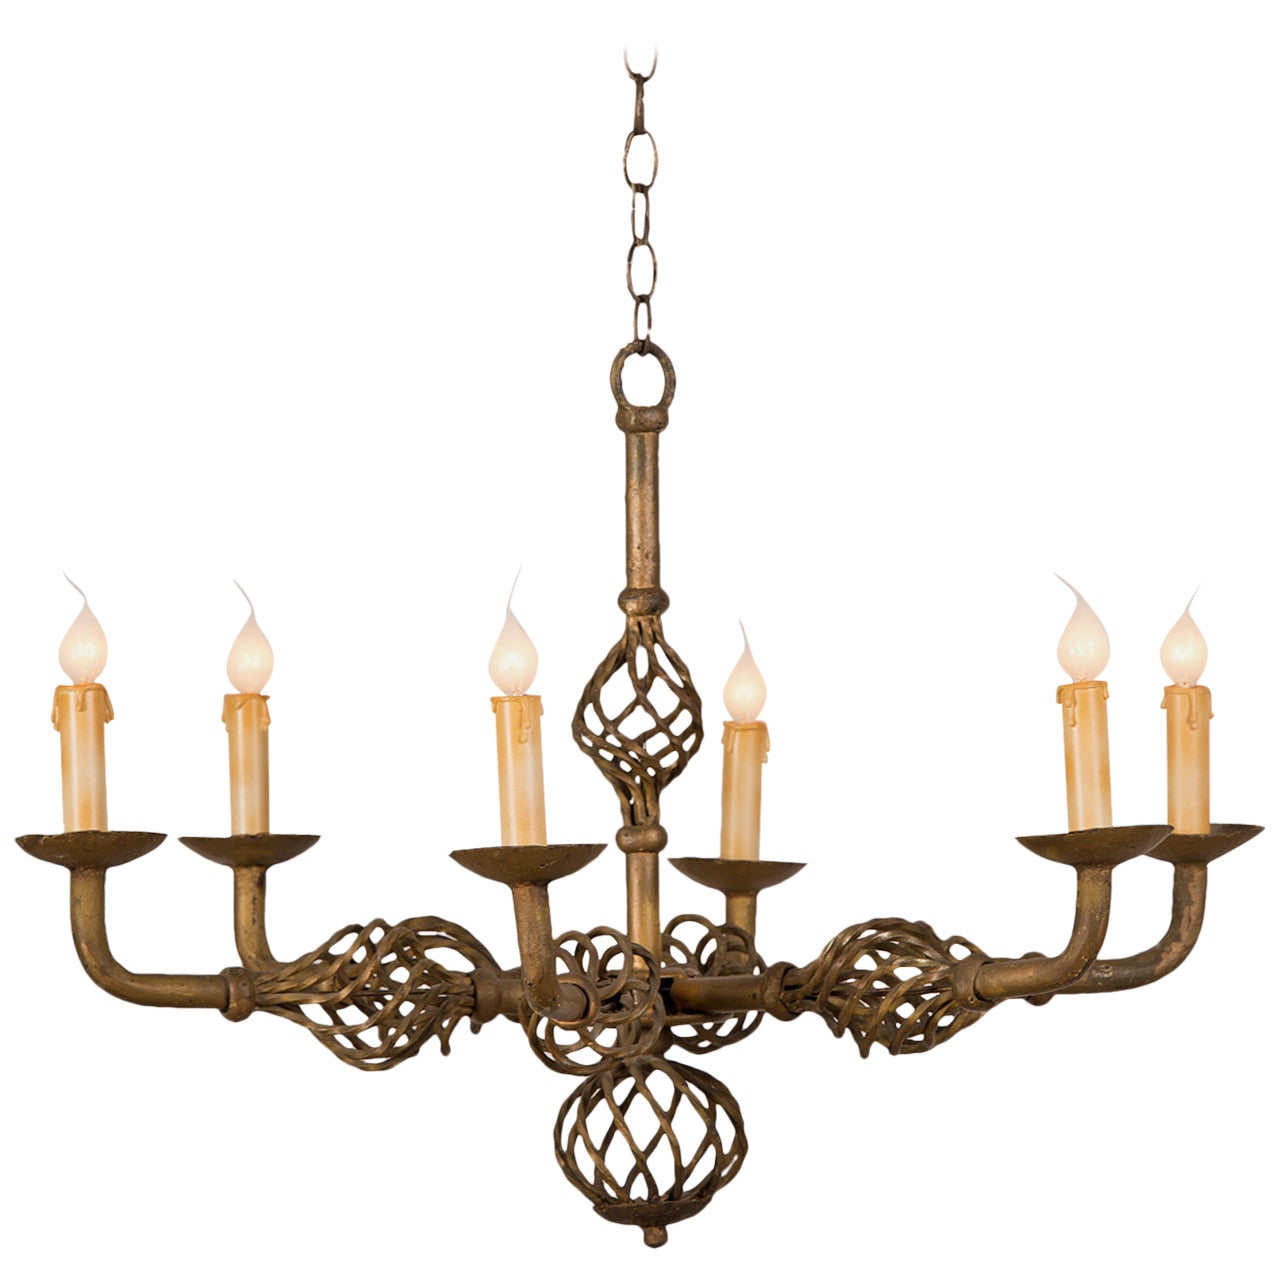 Gilded, Forged Iron Six-Light Vintage French Chandelier, circa 1930